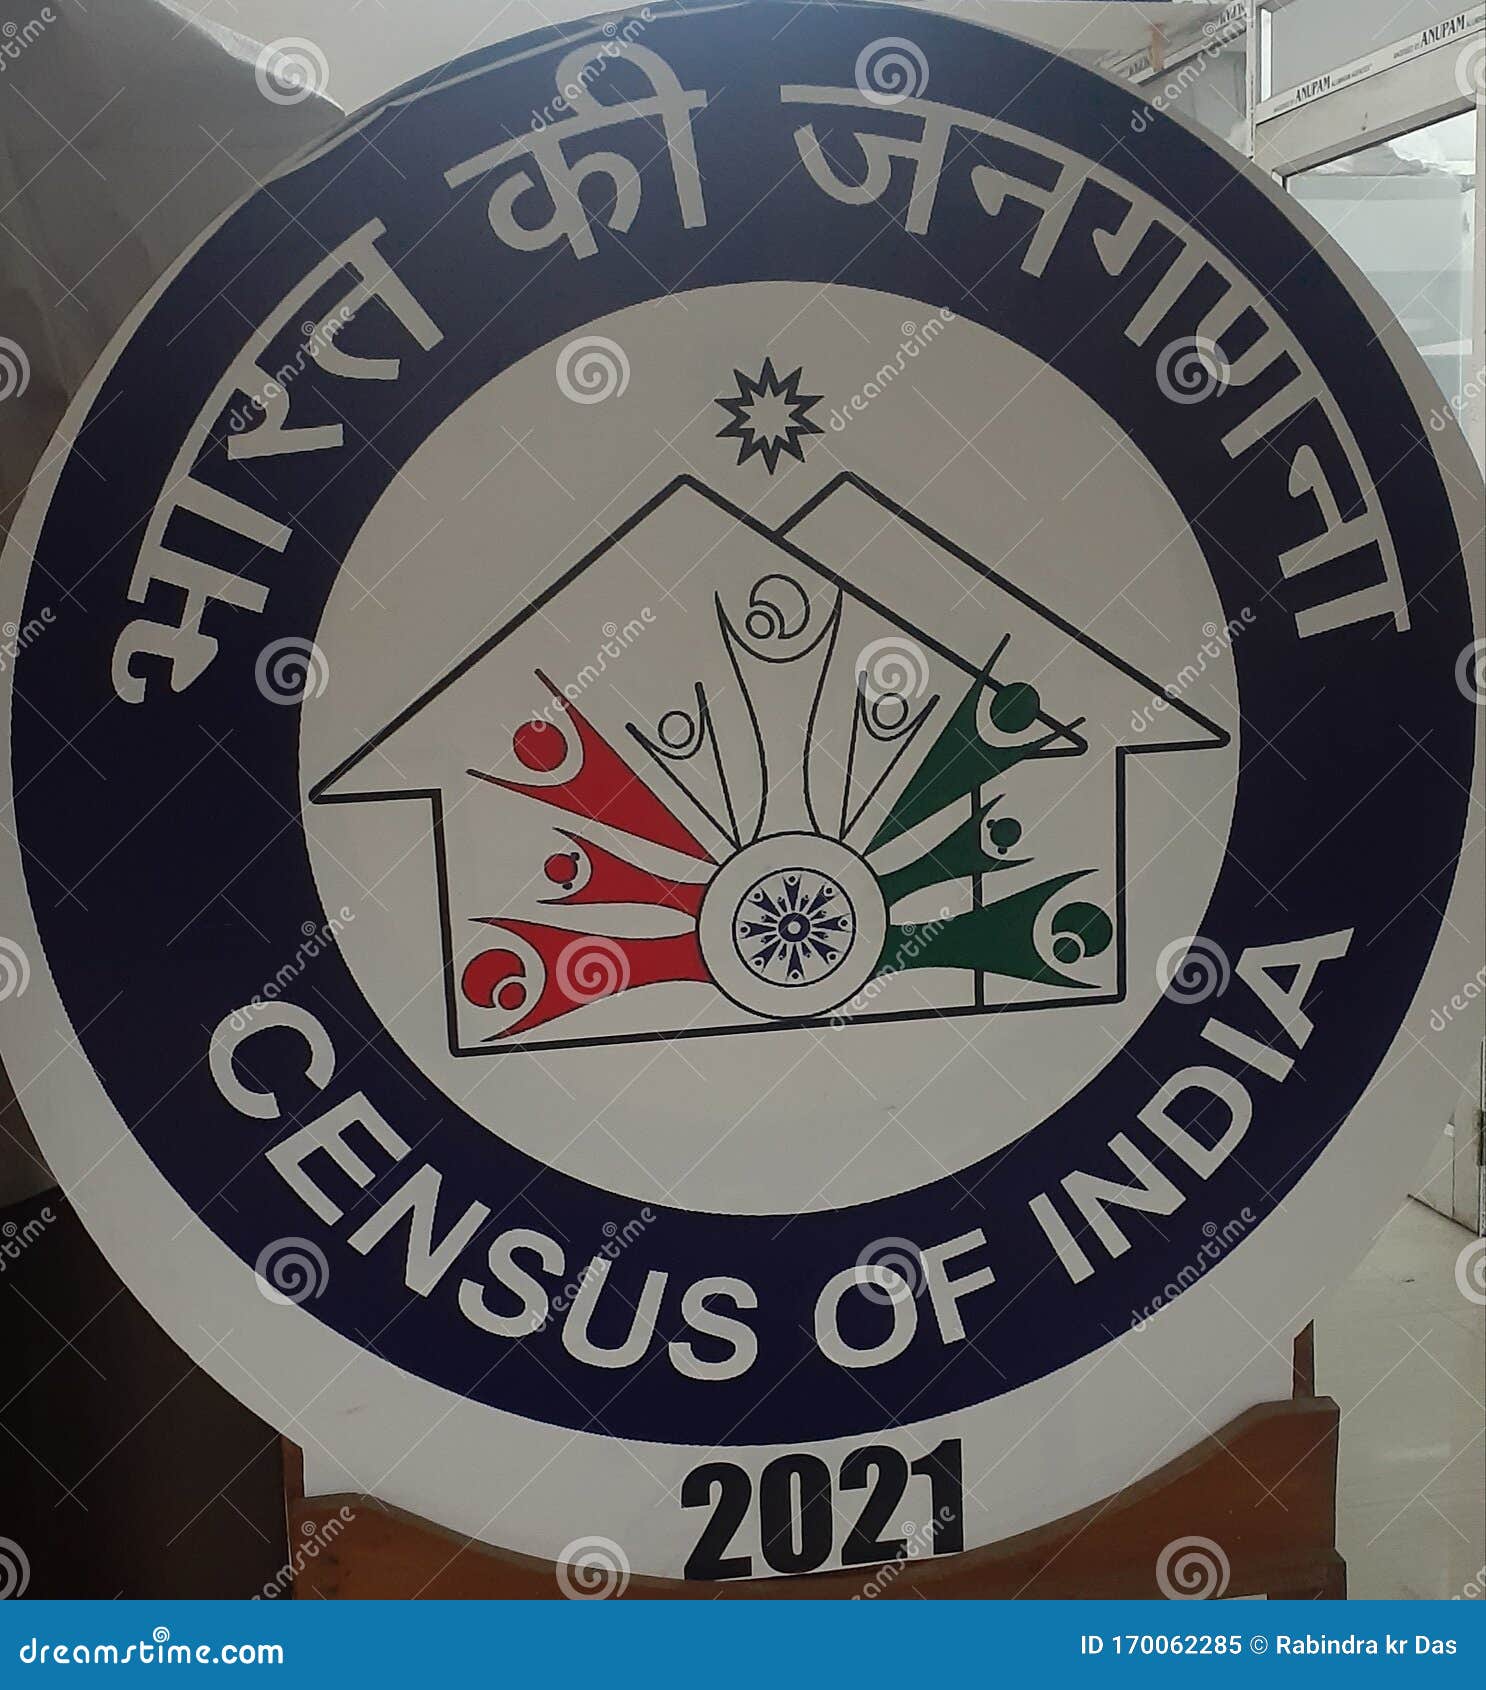 Blatant misuse of national emblem, govt logos by mobile apps makers